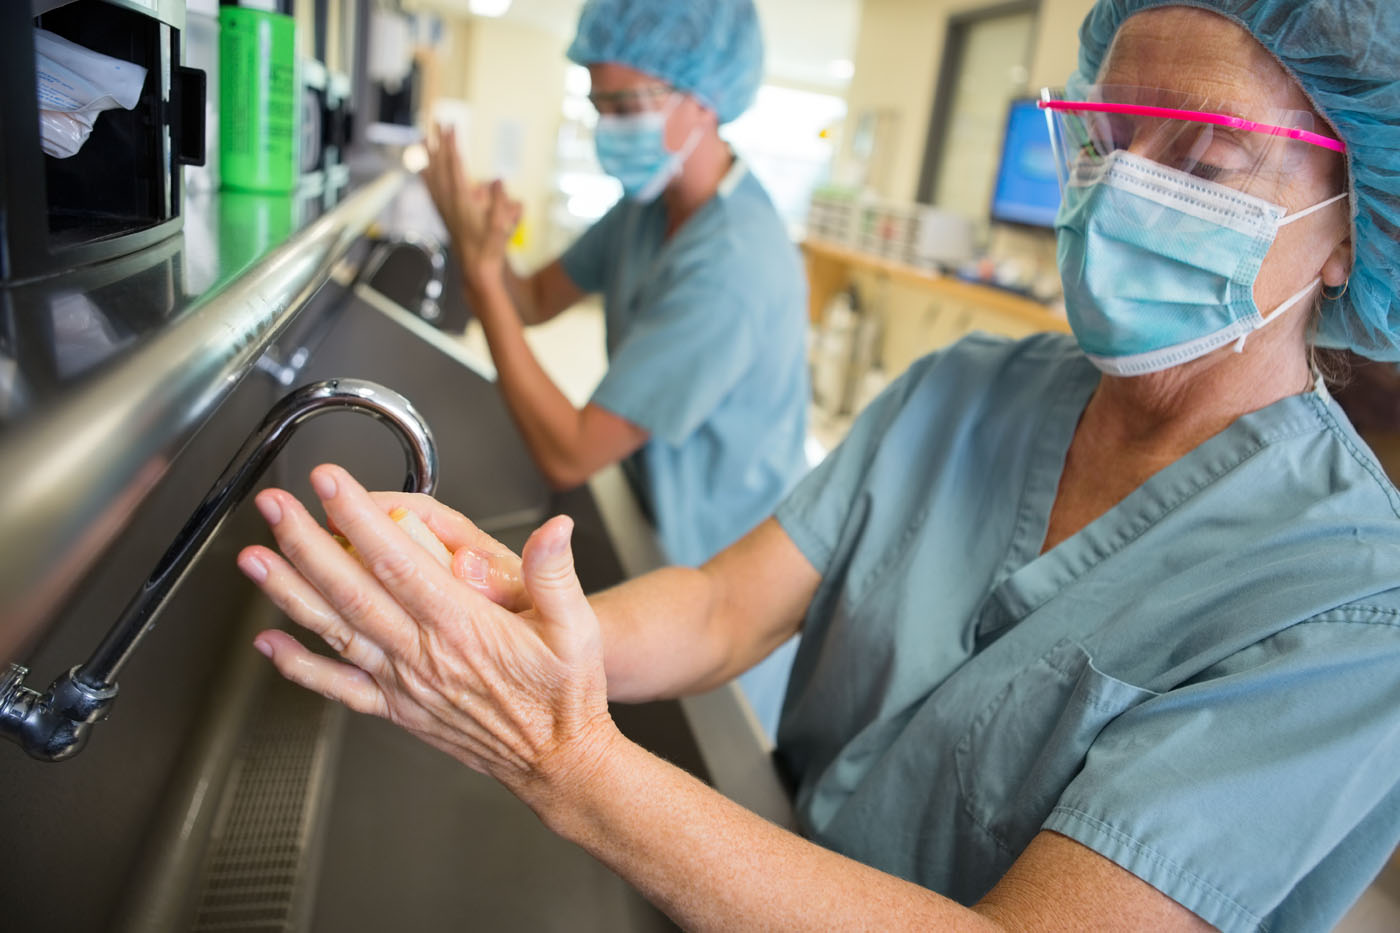 Enhance hospital efficiency through central sterile processing optimization. See how improving communication and teamwork can elevate overall hospital efficiency.